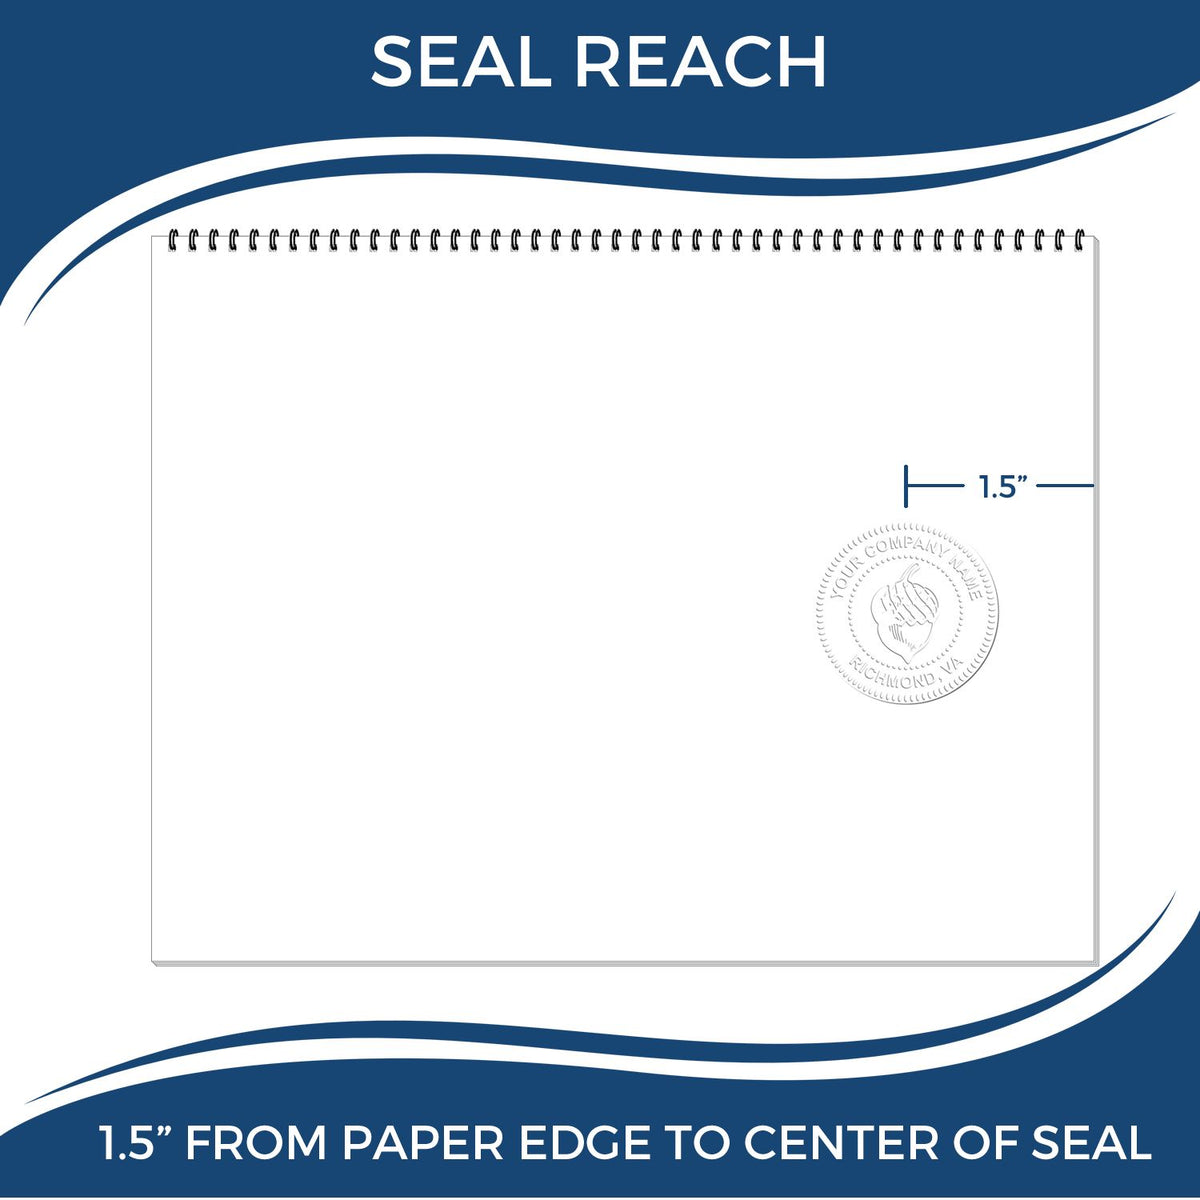 An infographic showing the seal reach which is represented by a ruler and a miniature seal image of the Soft Pocket Guam Landscape Architect Embosser